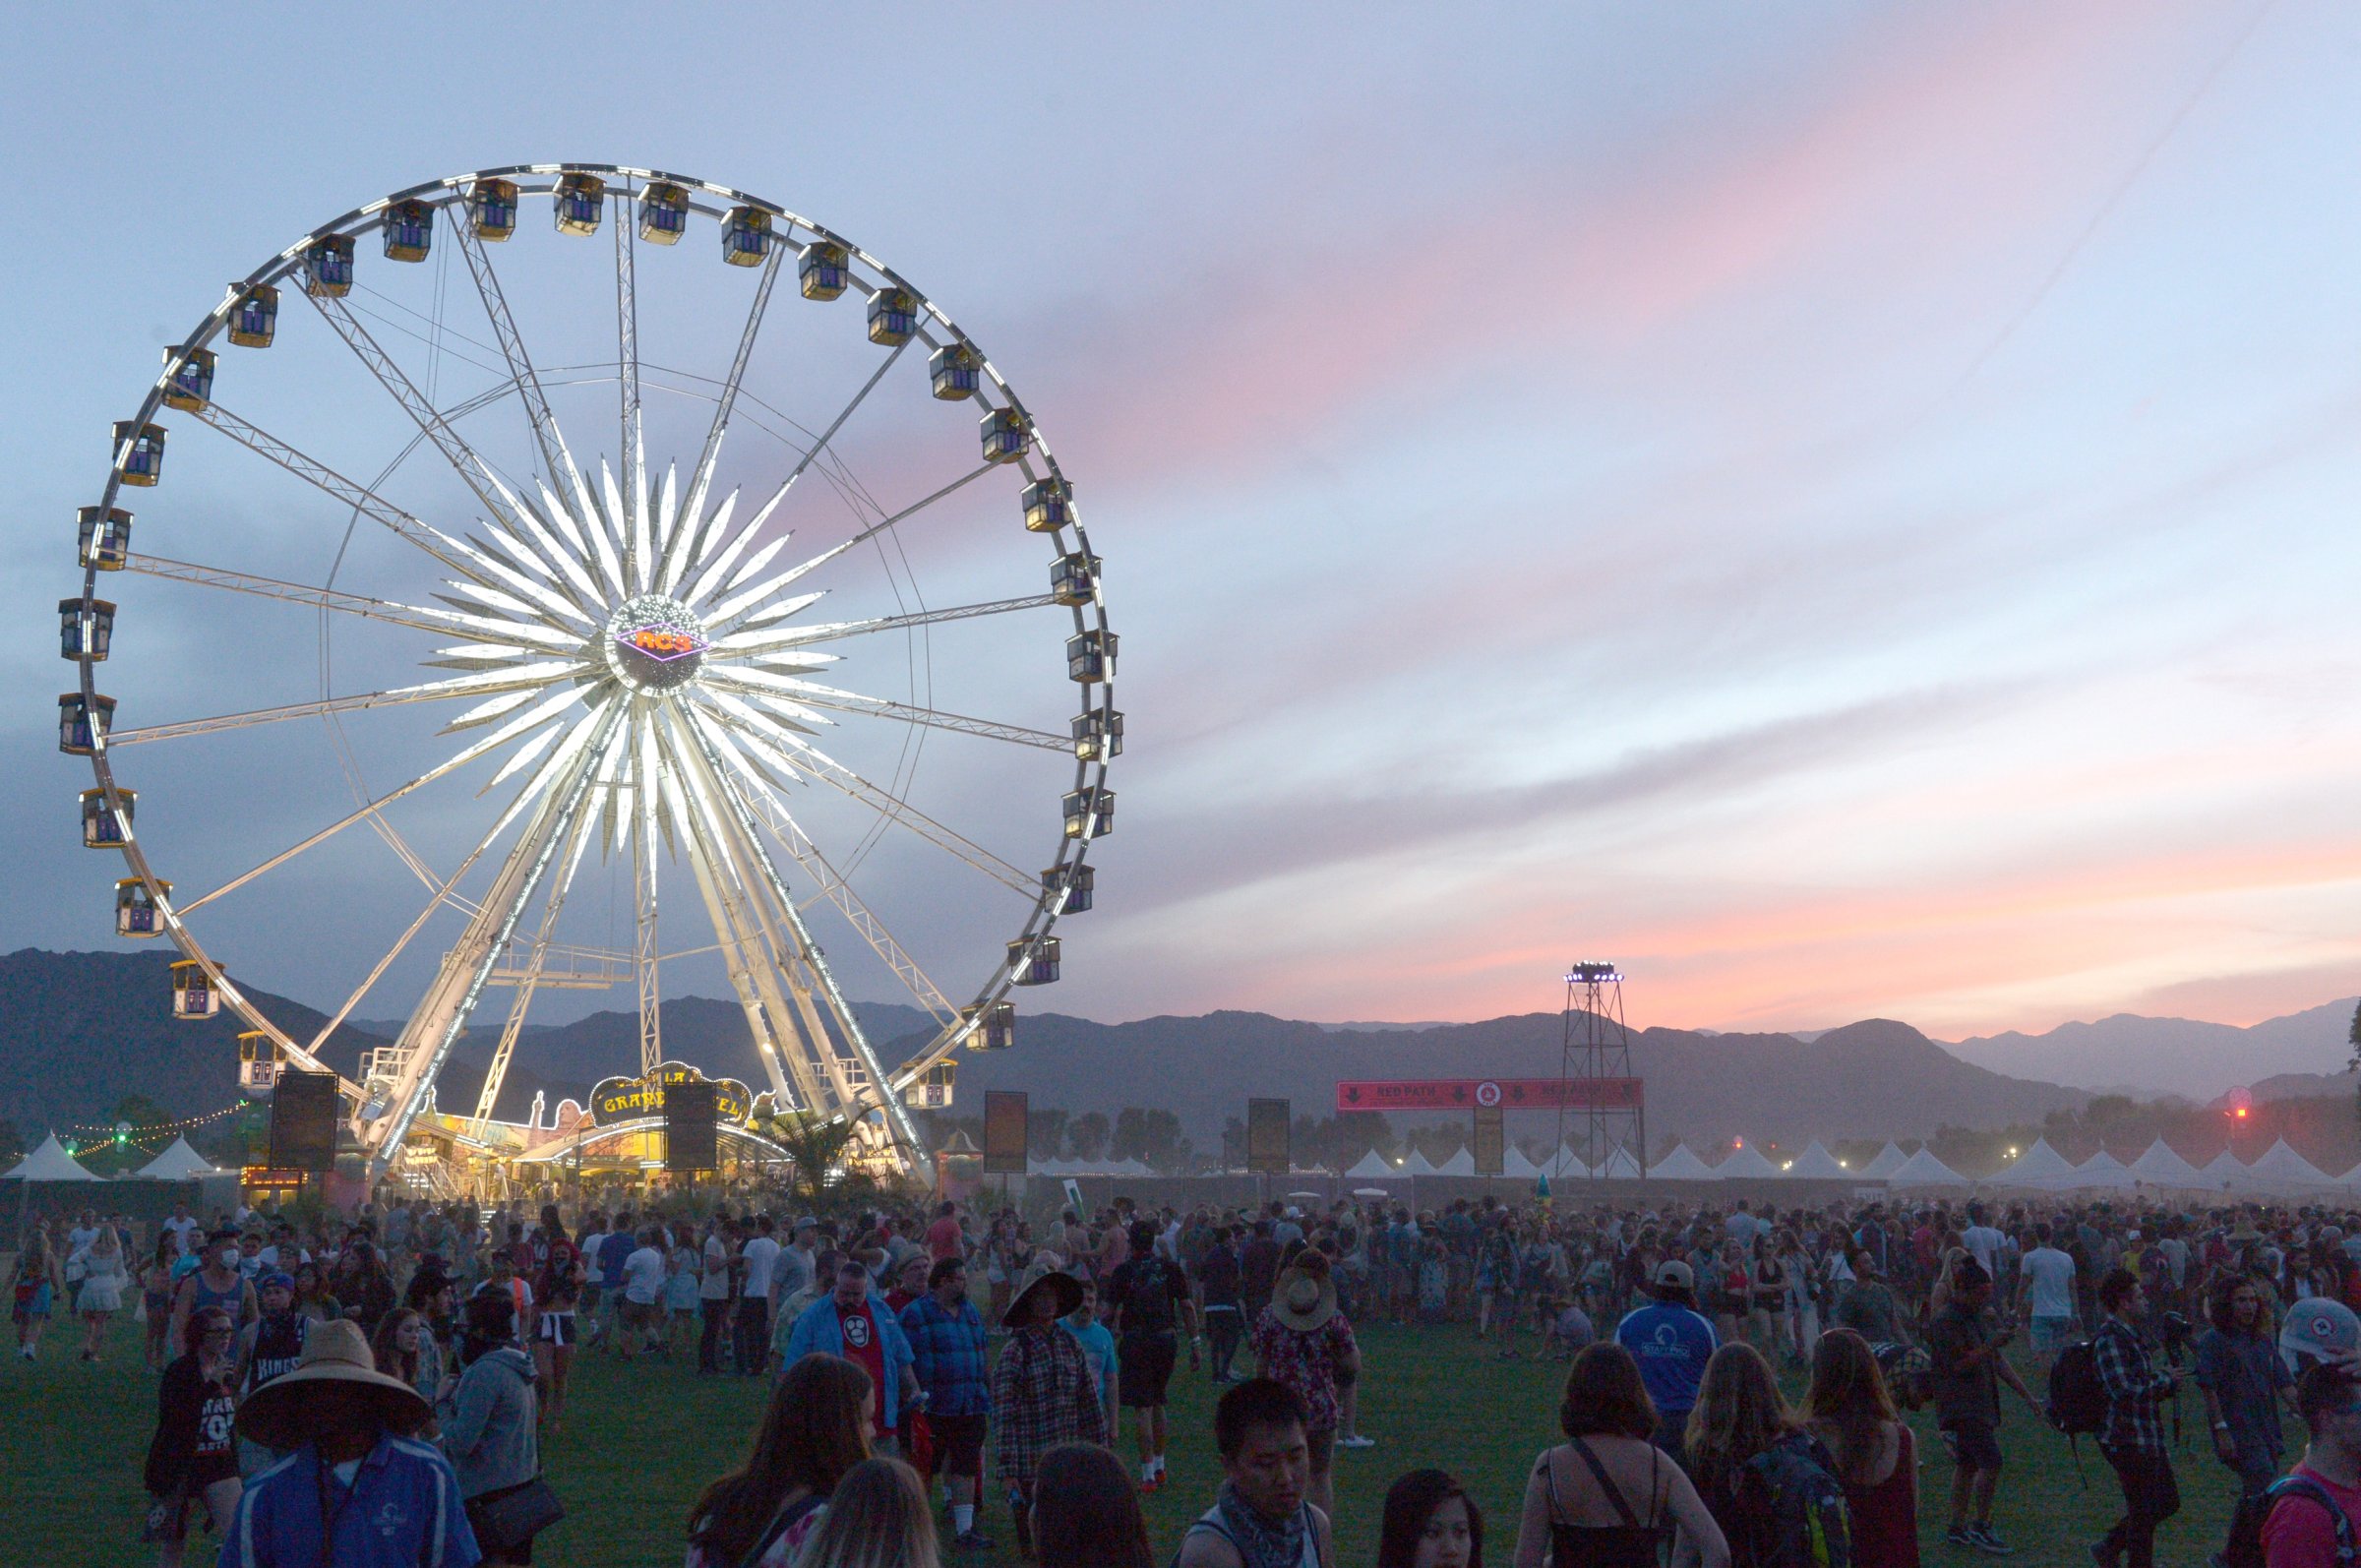 The Ferris wheel is seen after sunset during day 1 of the 2015 Coachella Valley Music & Arts Festival (Weekend 1) at the Empire Polo Club on April 10, 2015 in Indio, California.